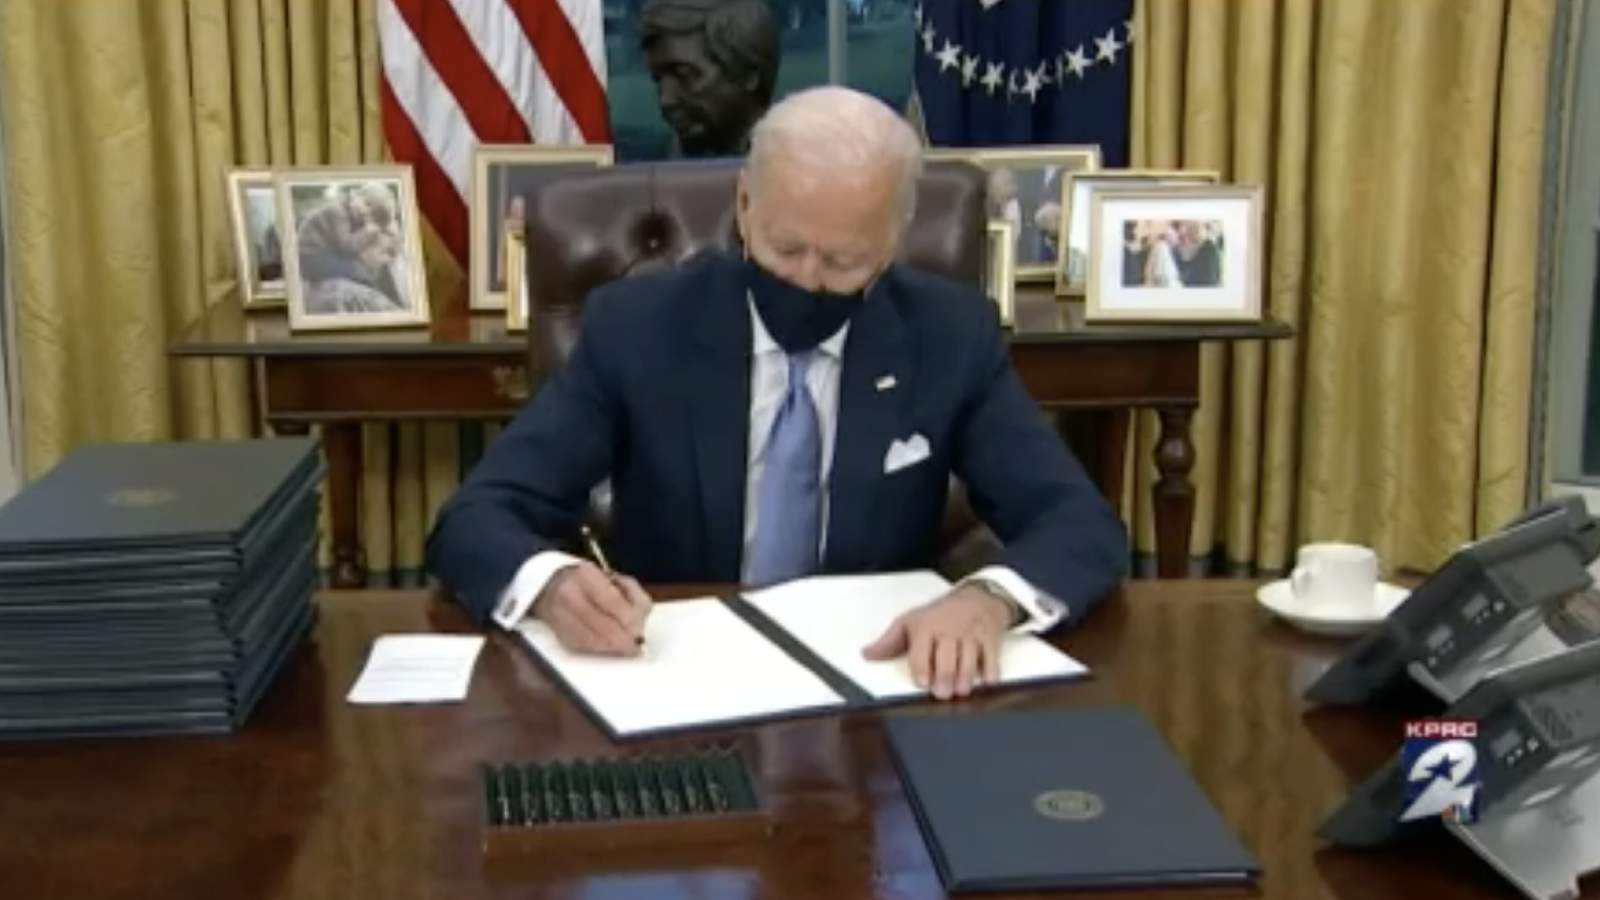 See which executive actions President Biden signed on his first day